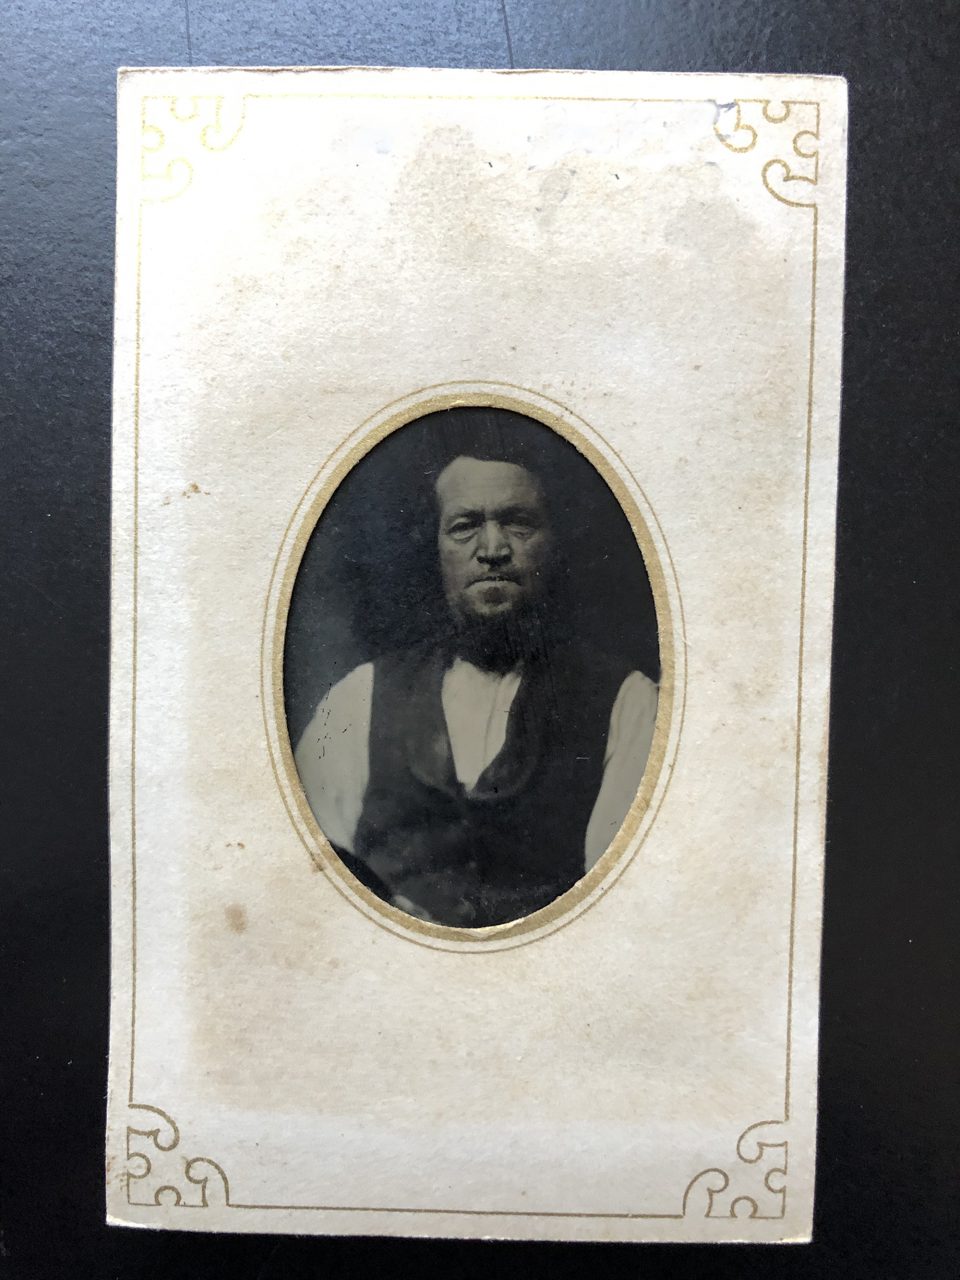 Small tintype portrait of unidentified man by an unidentified photographer.